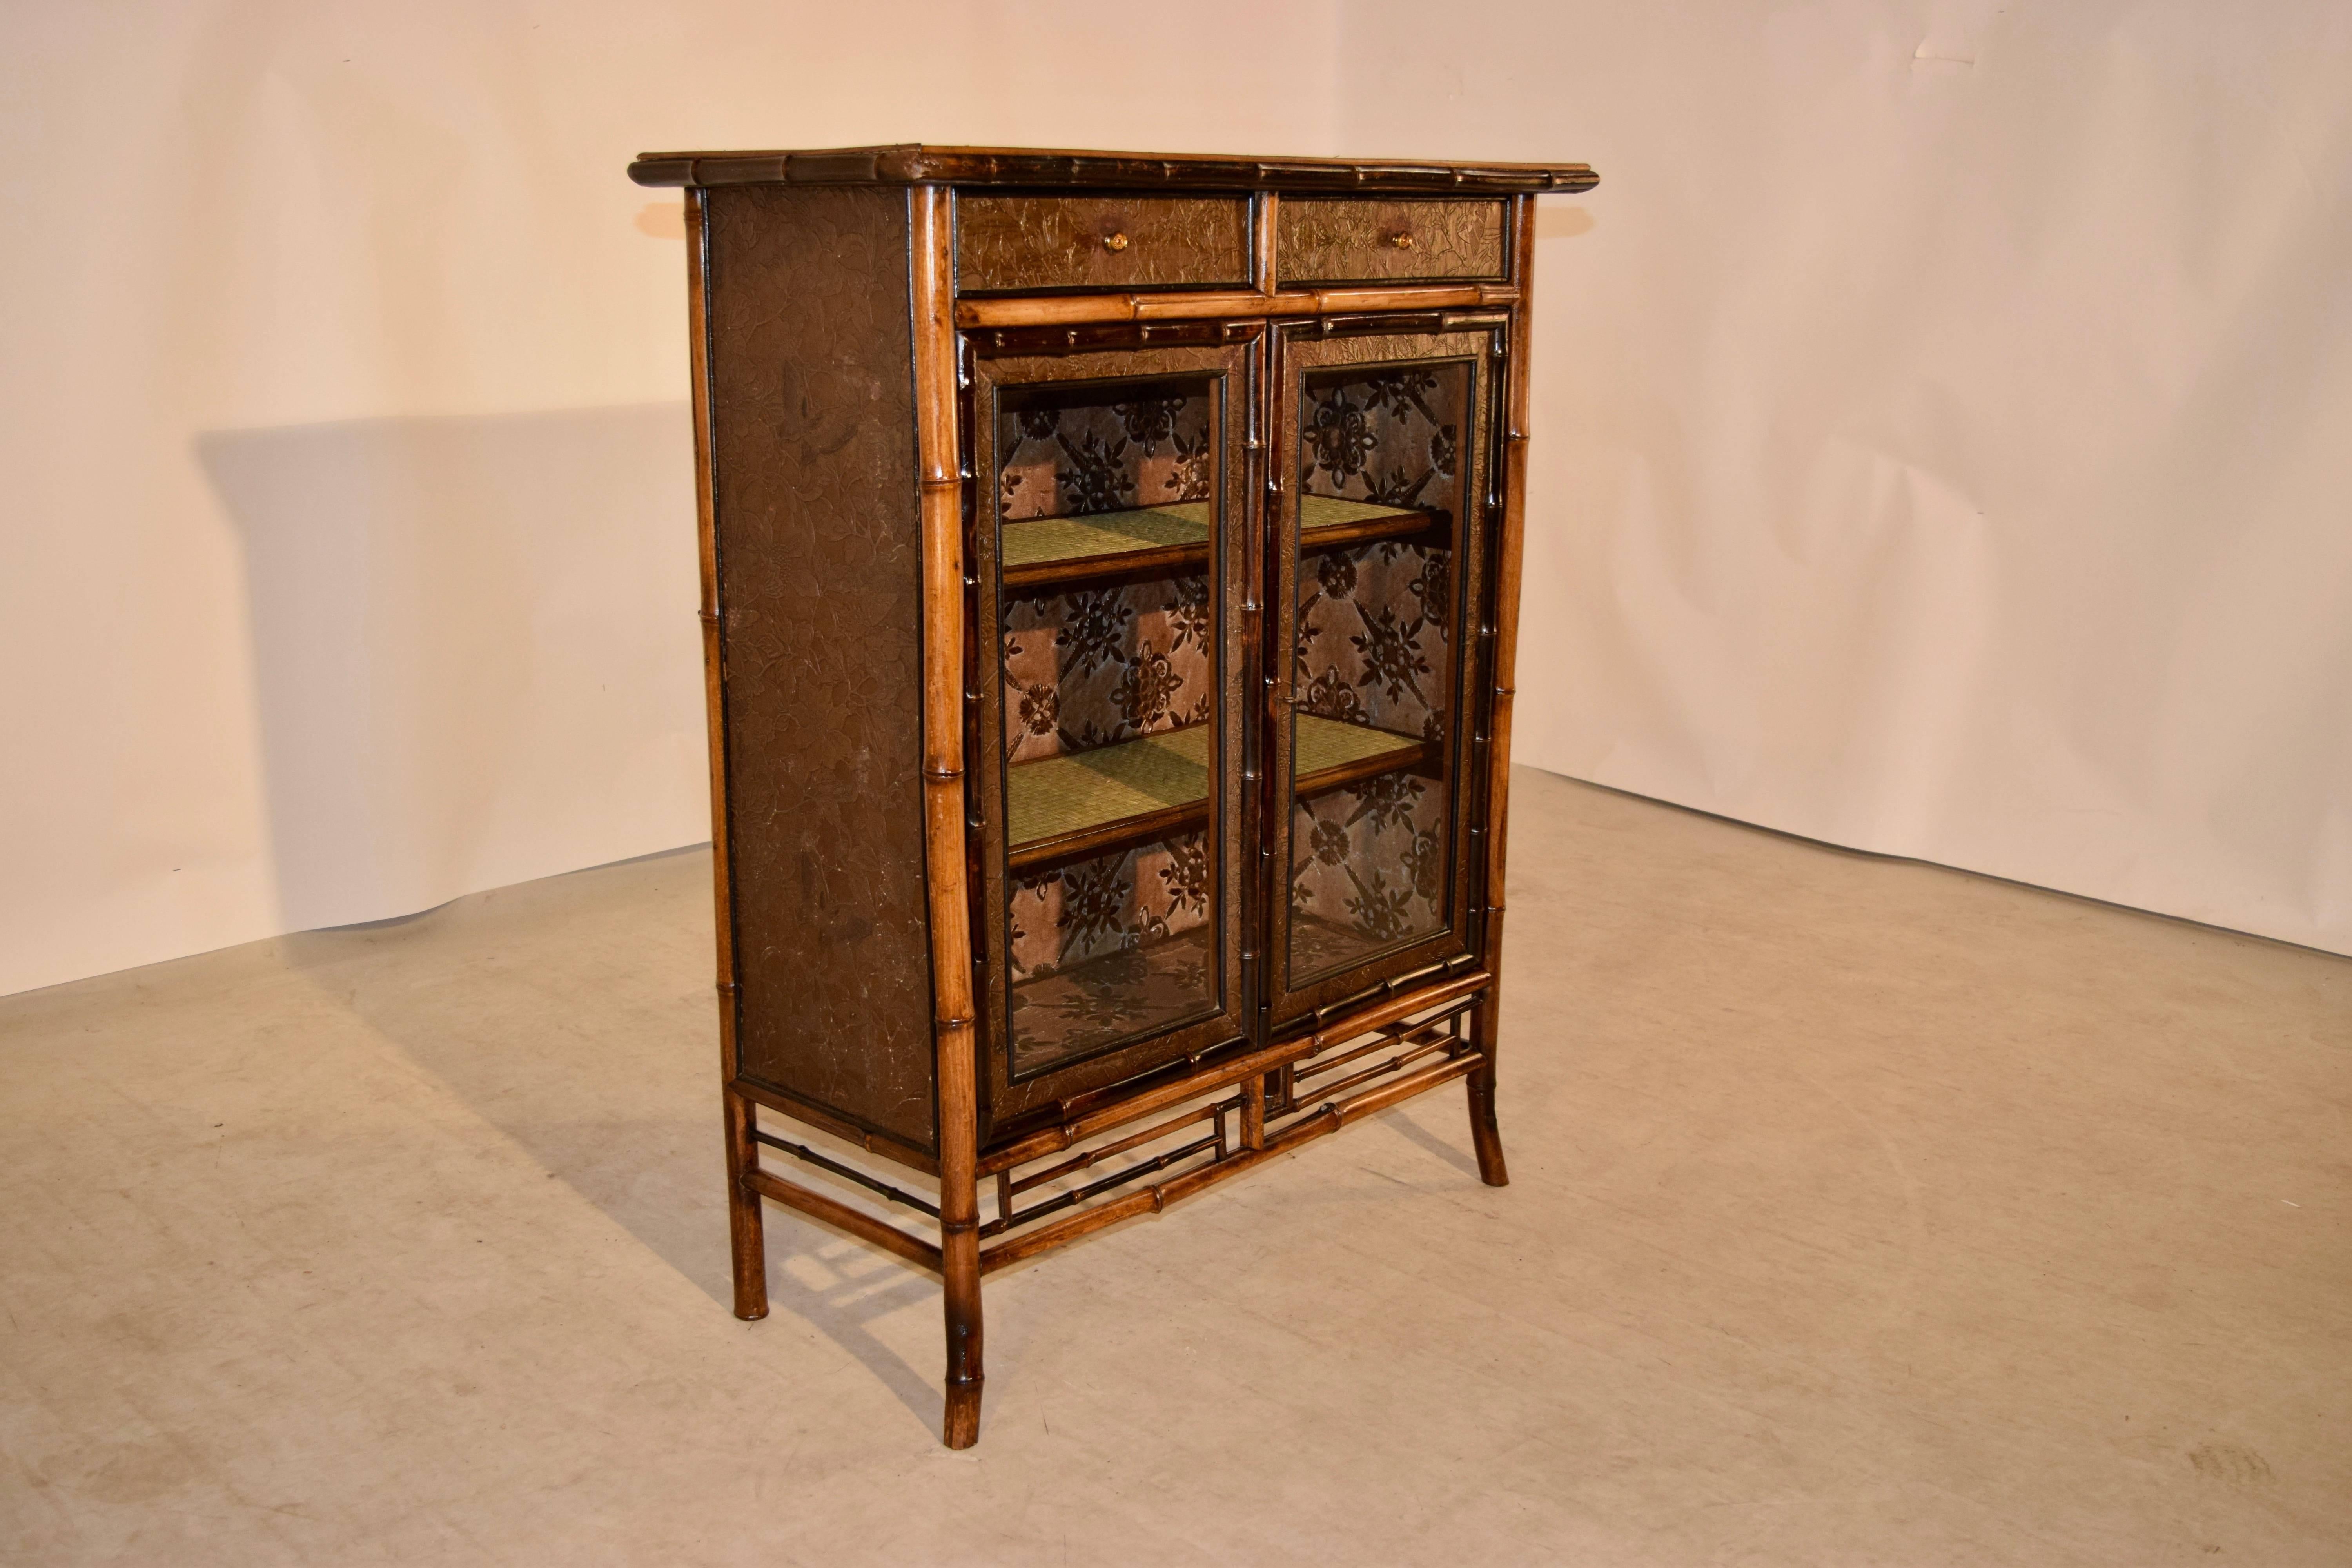 19th century French bamboo bookcase with a rush top and shelves. There are two drawers. The exterior and interior are covered in hand finished embossed wallpaper. The doors are framed glass. There is bamboo fretwork at the bottom of the case and it